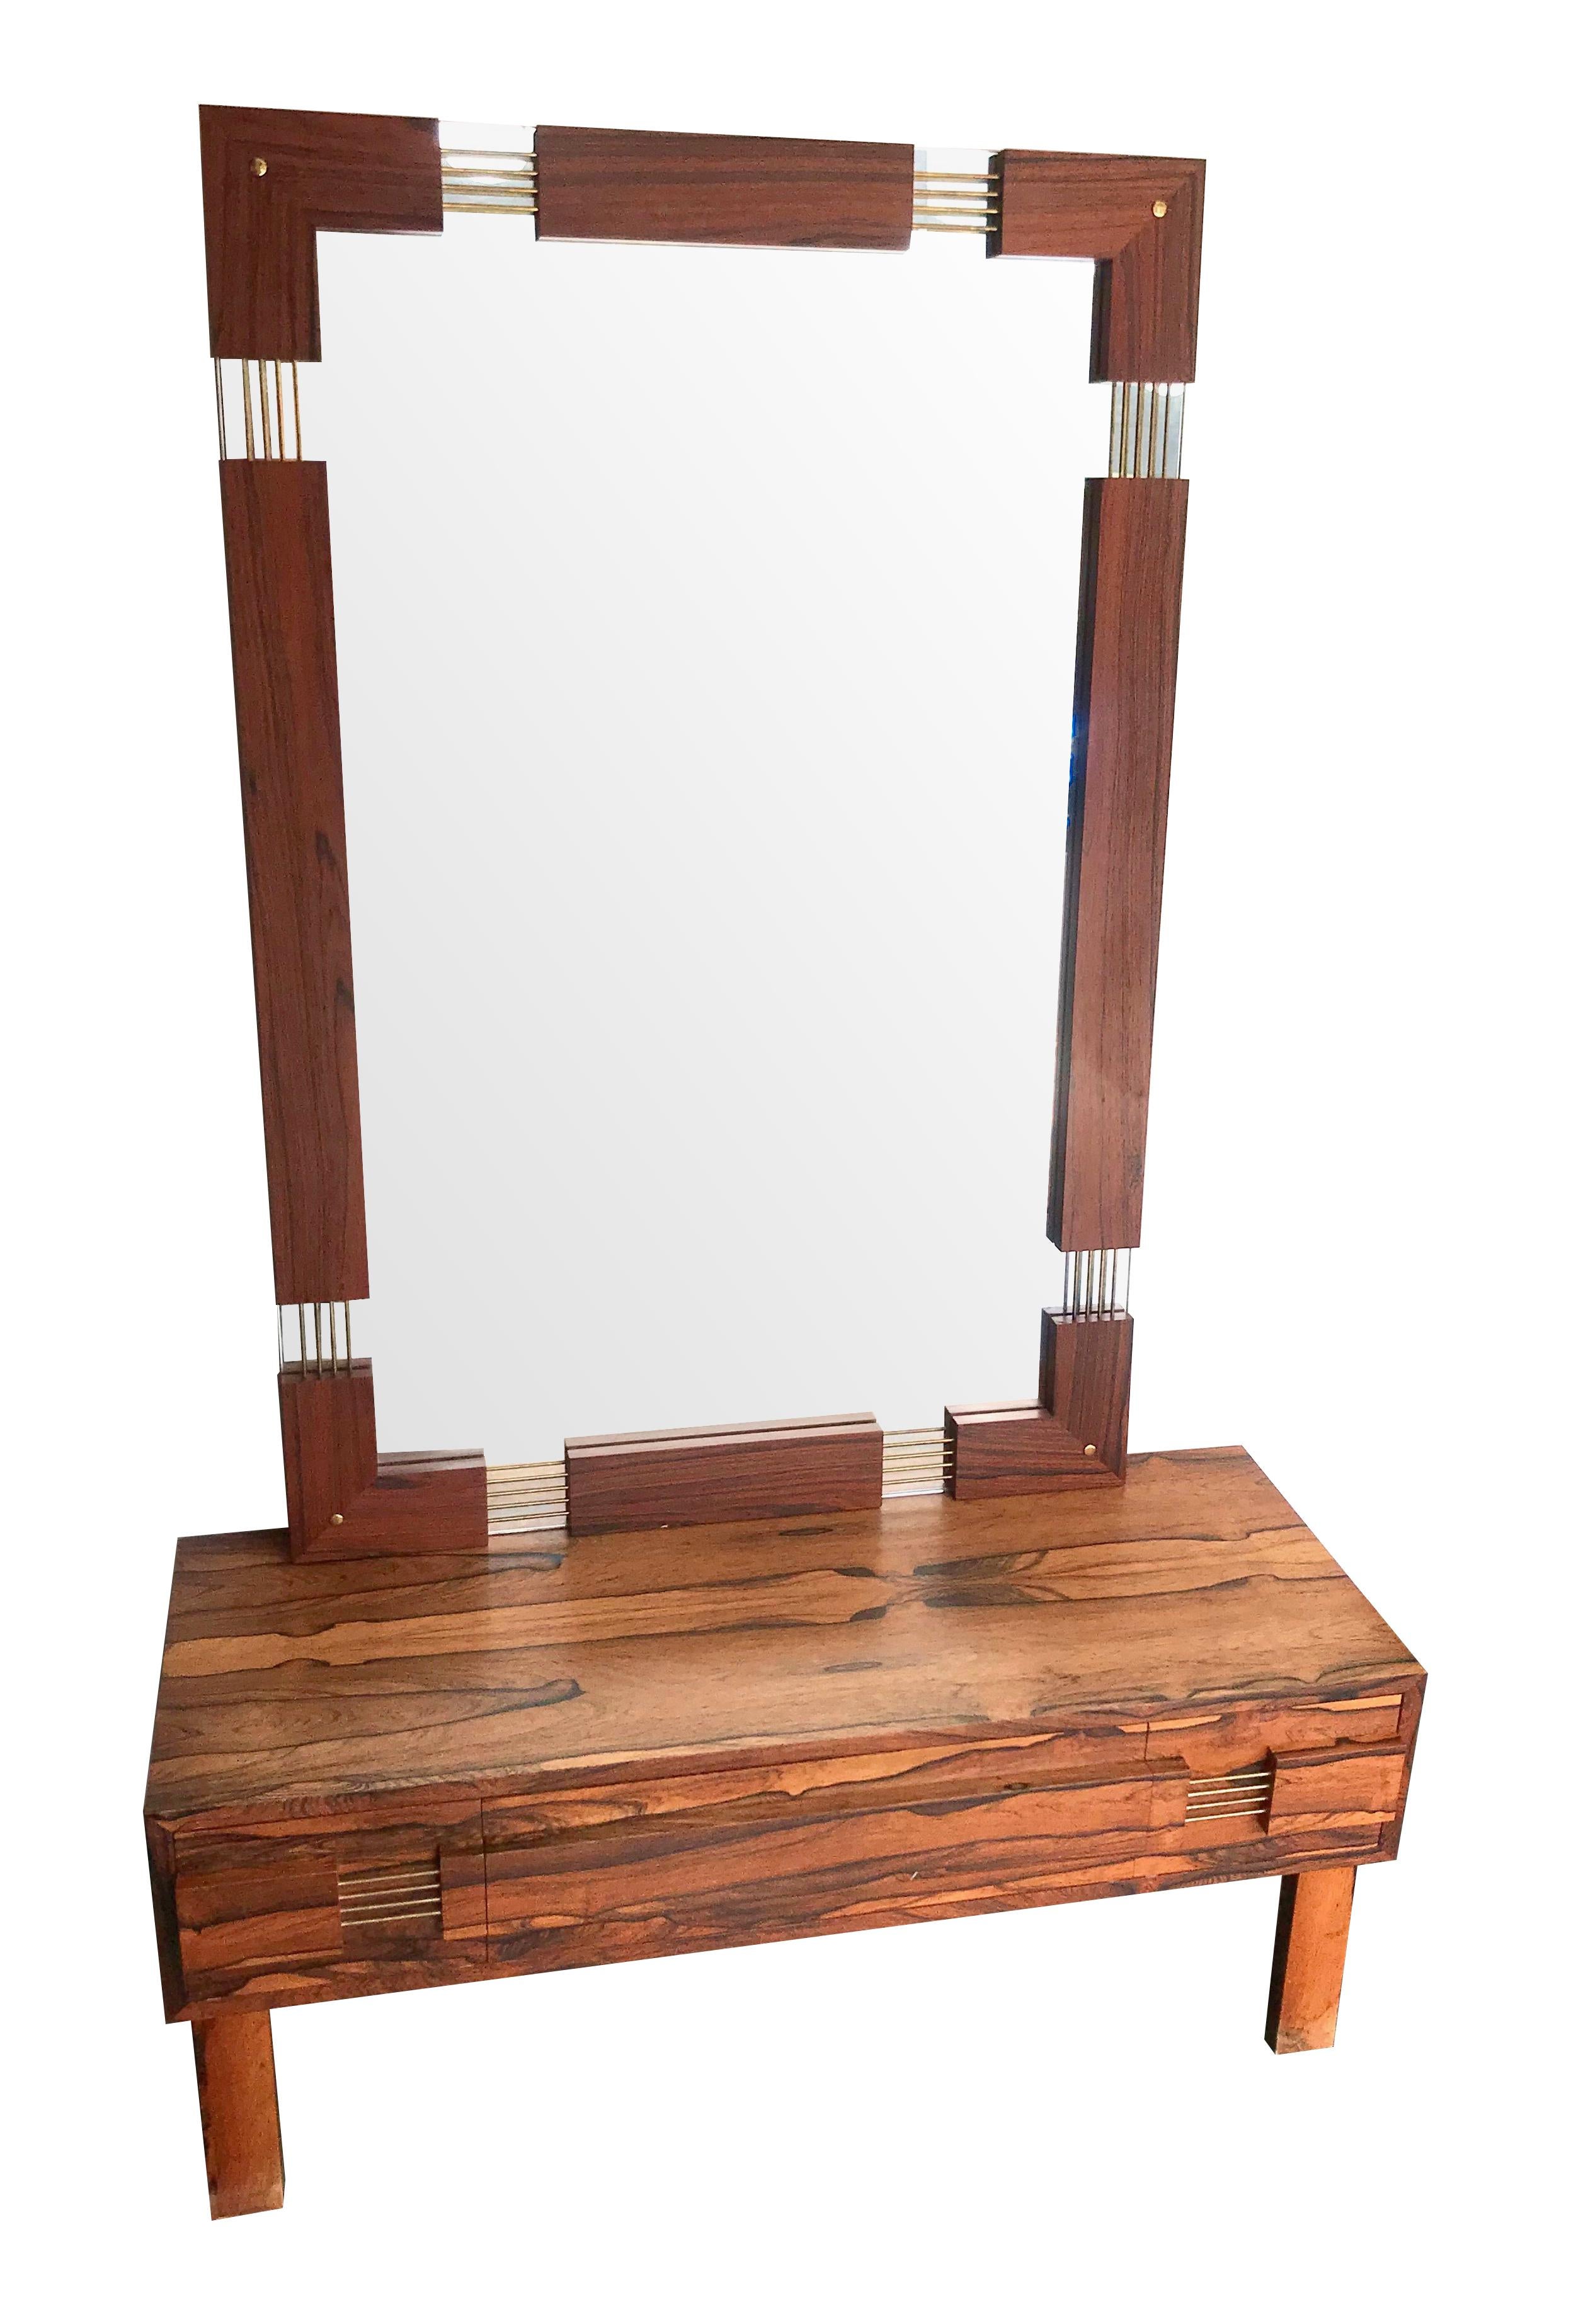 A Swedish rosewood low chest of drawers / dressing table with matching wall mirror by AB Glas & Tra, Sweden, with 3 drawers in the dressing table with brass detail handles and matching wall mirror with rosewood frame and and matching brass detail.